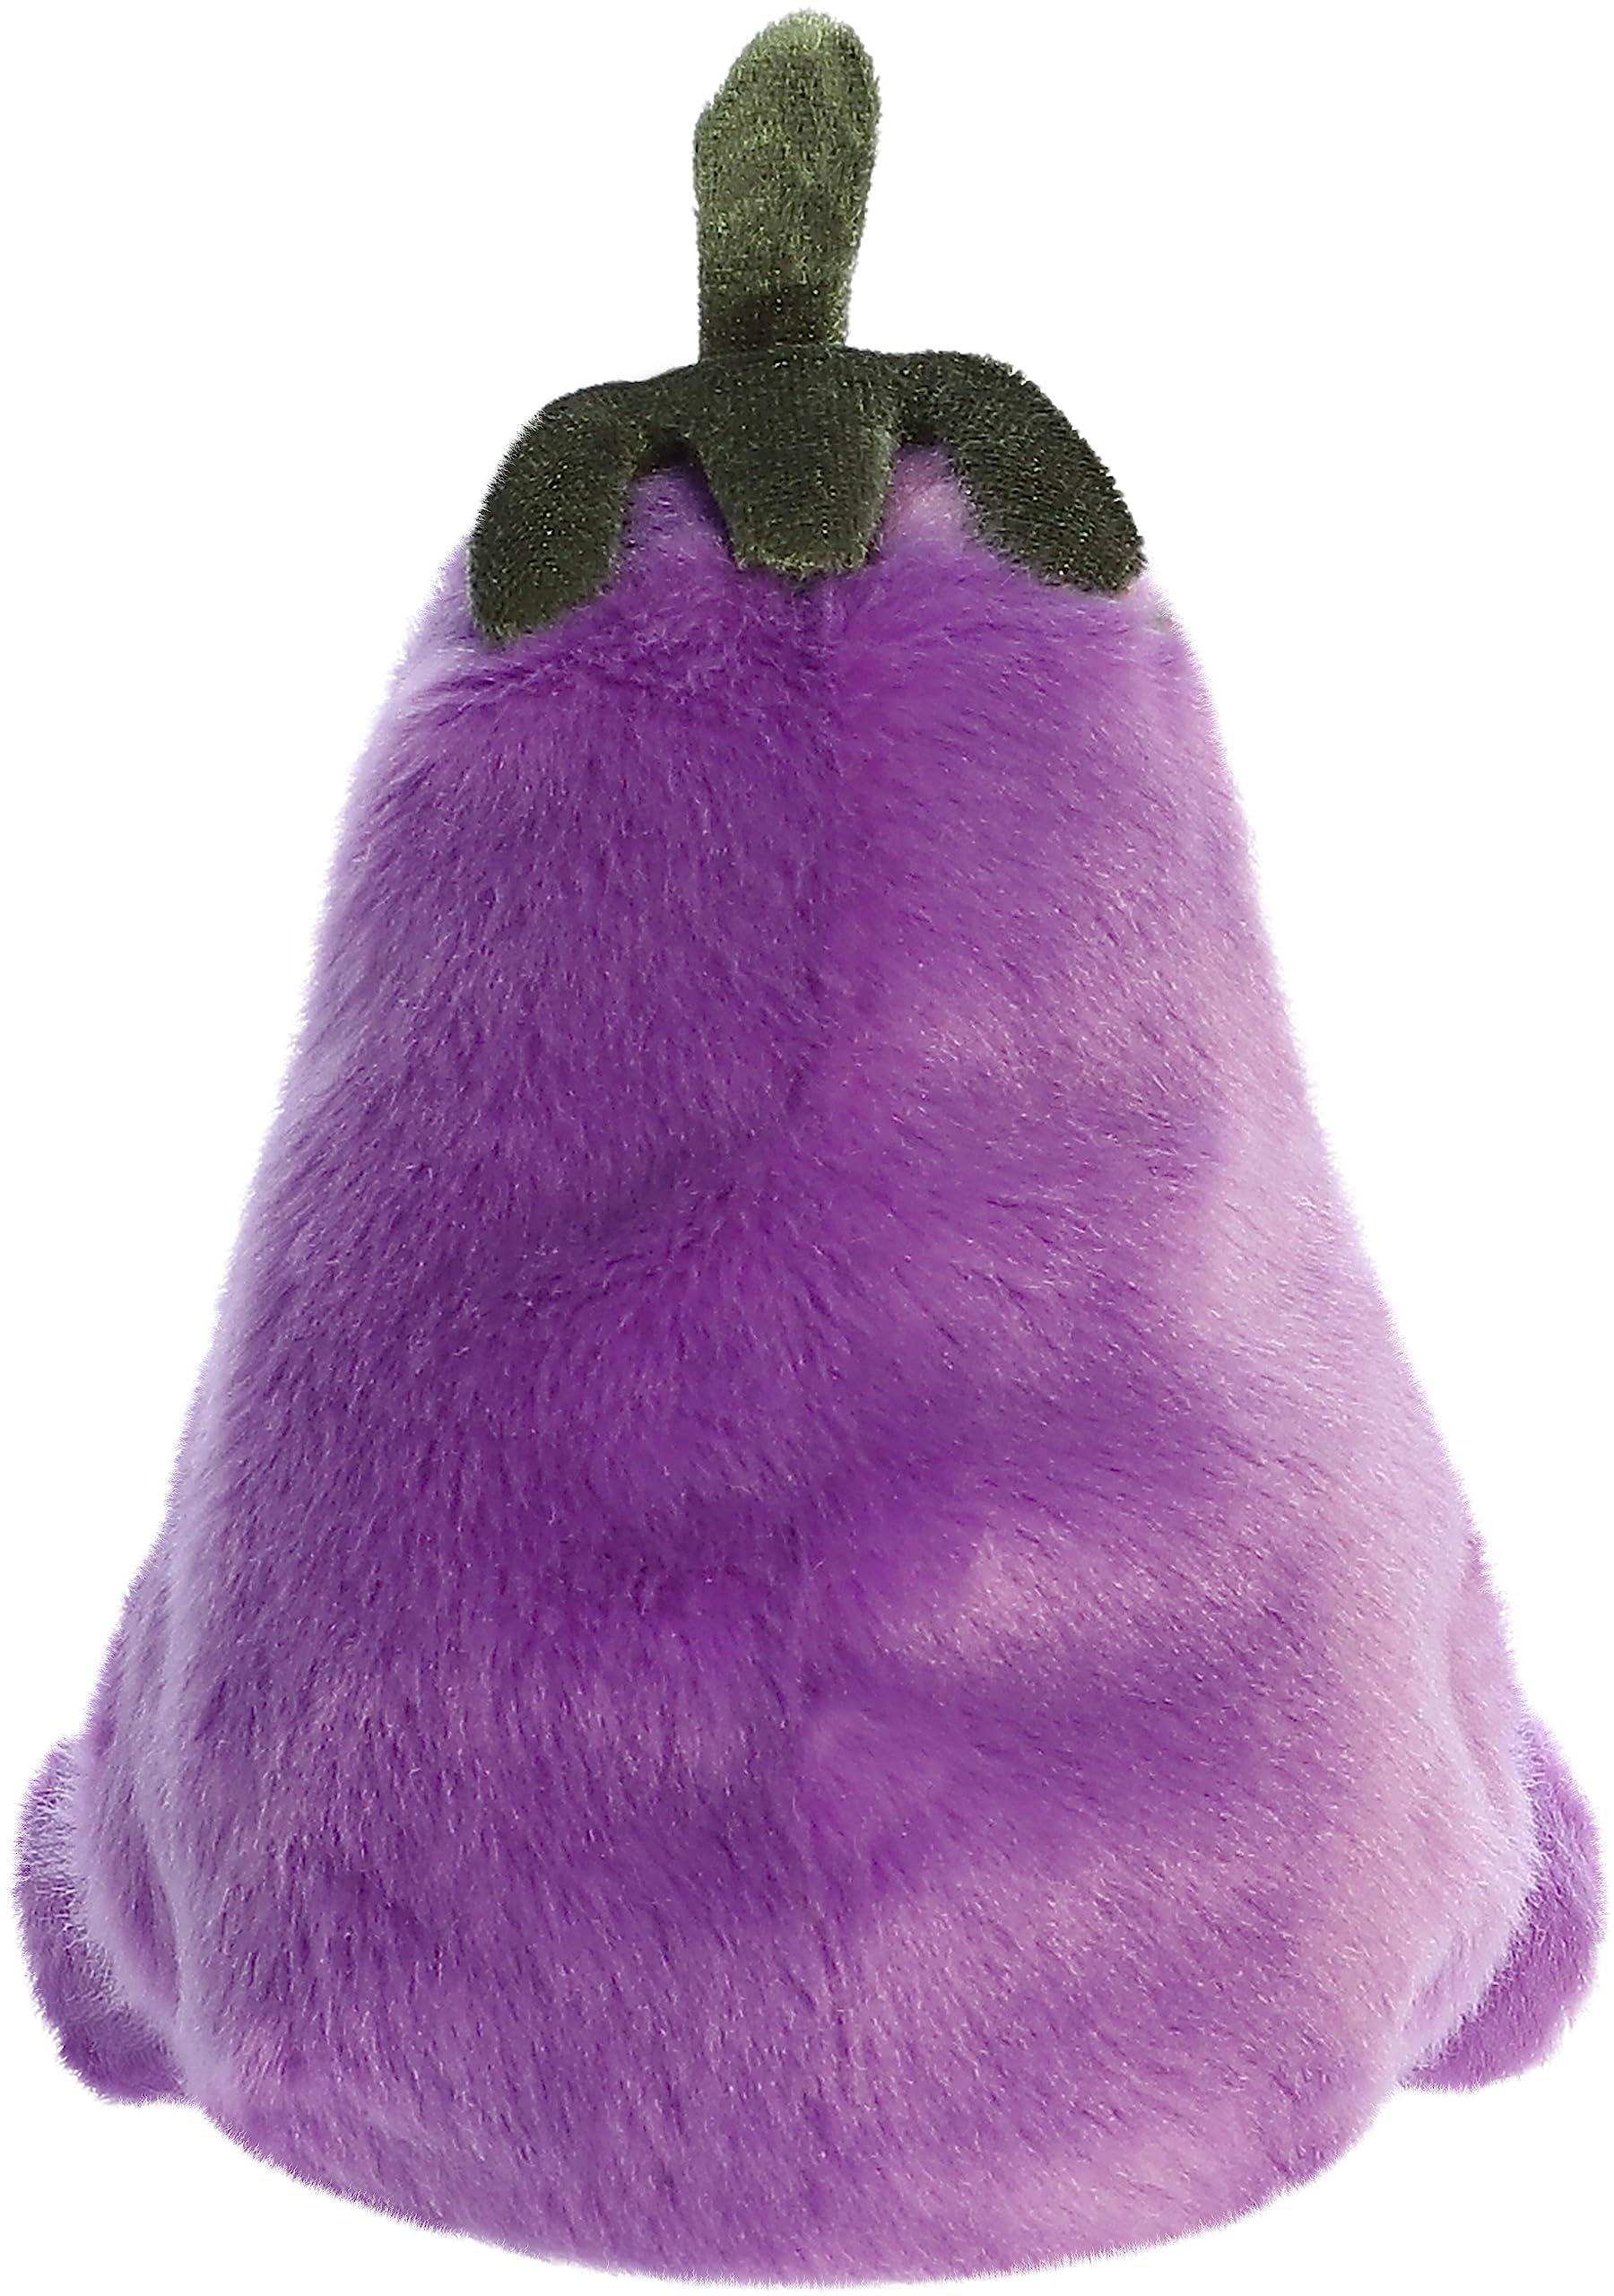 aurora adorable palm pals aubrey eggplant stuffed animal - pocket-sized play - collectable fun - purple 5 inches